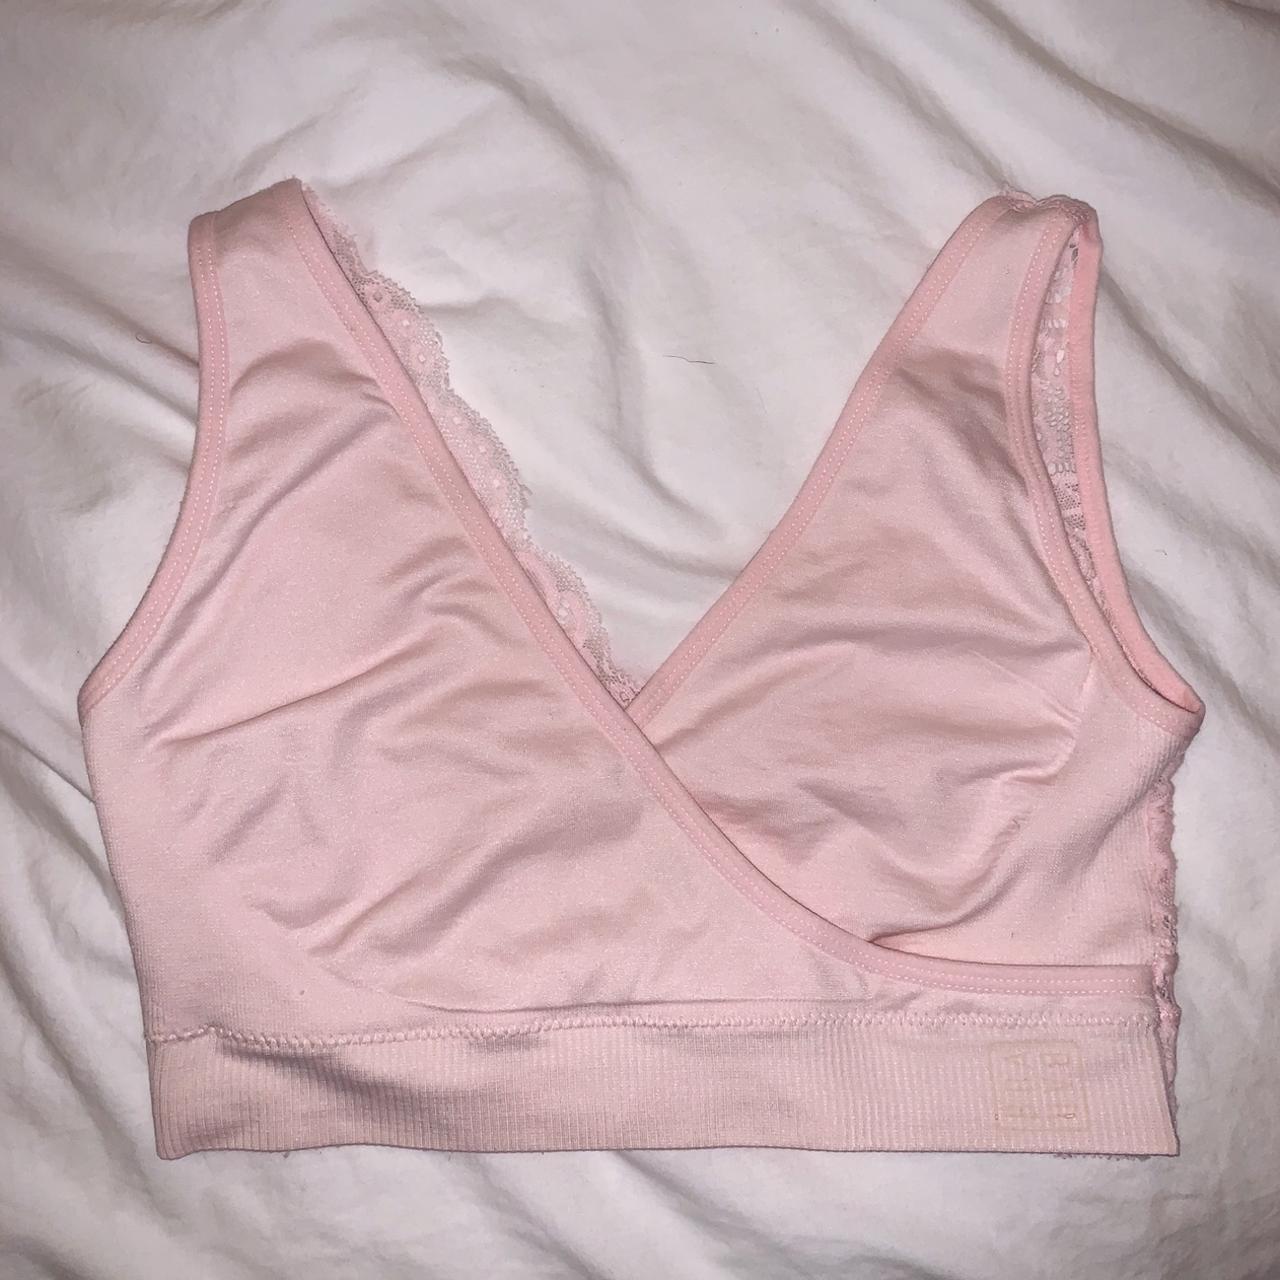 Product Image 3 - light pink bralette

new

fits size xs/s

I’m